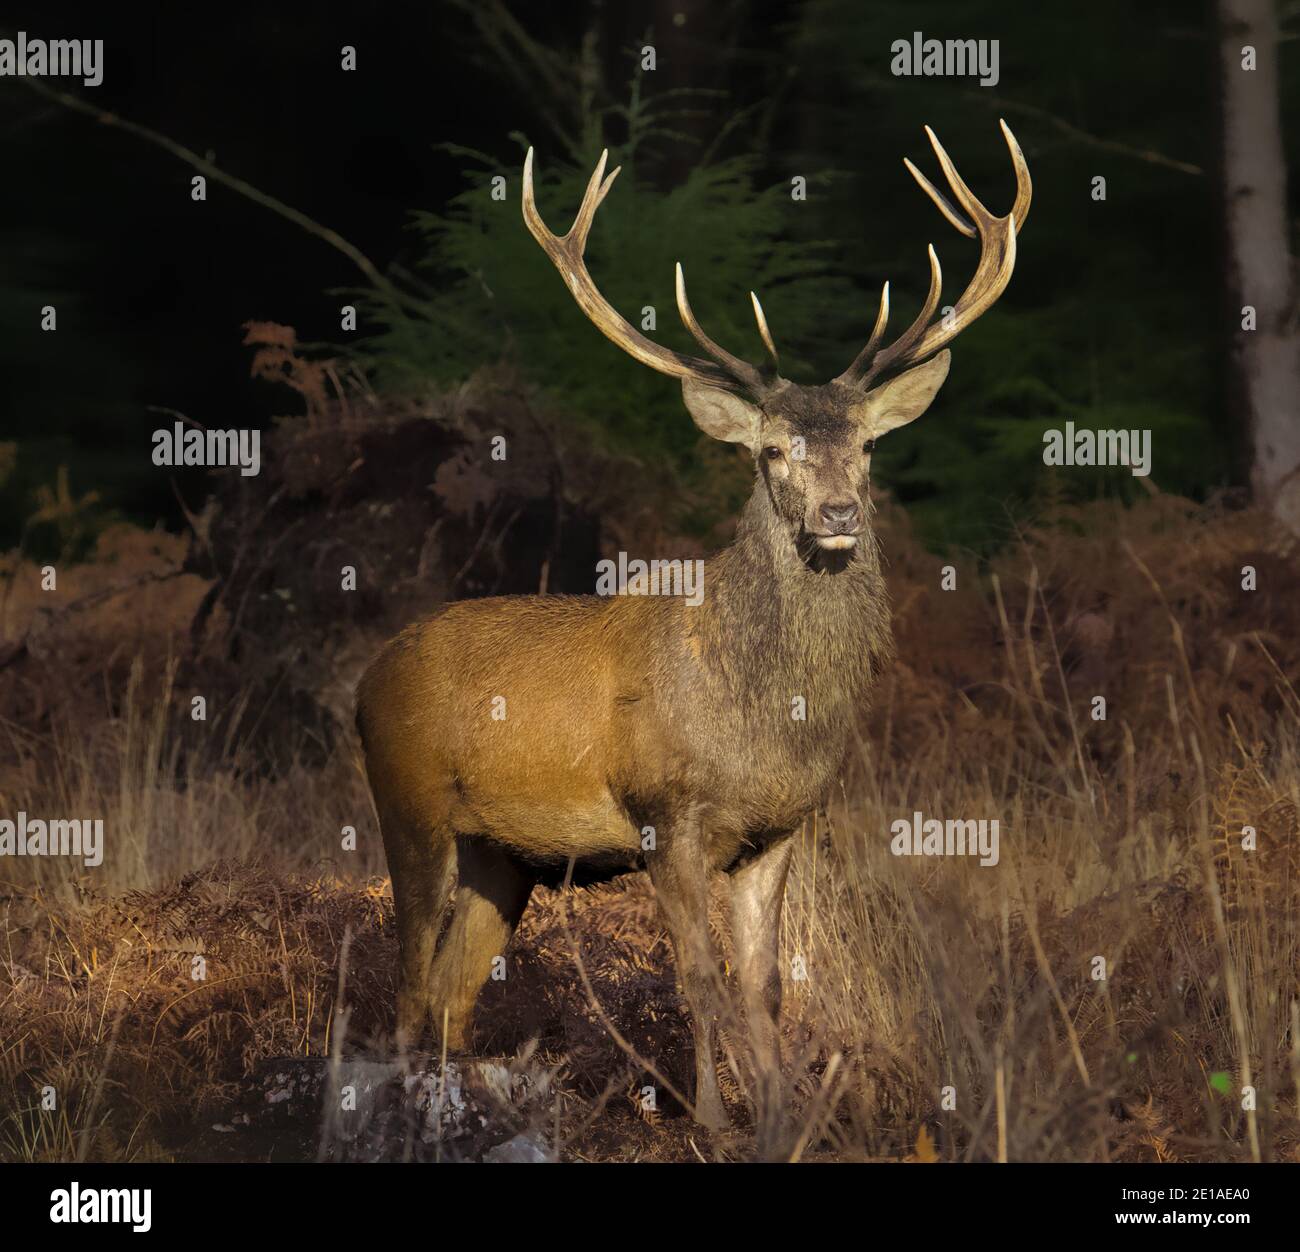 Male Red Deer Stag, Cervus elaphus, With Large Antlers Standing In A Forest facing The Camera Lit By The Sun. New Forest UK Stock Photo